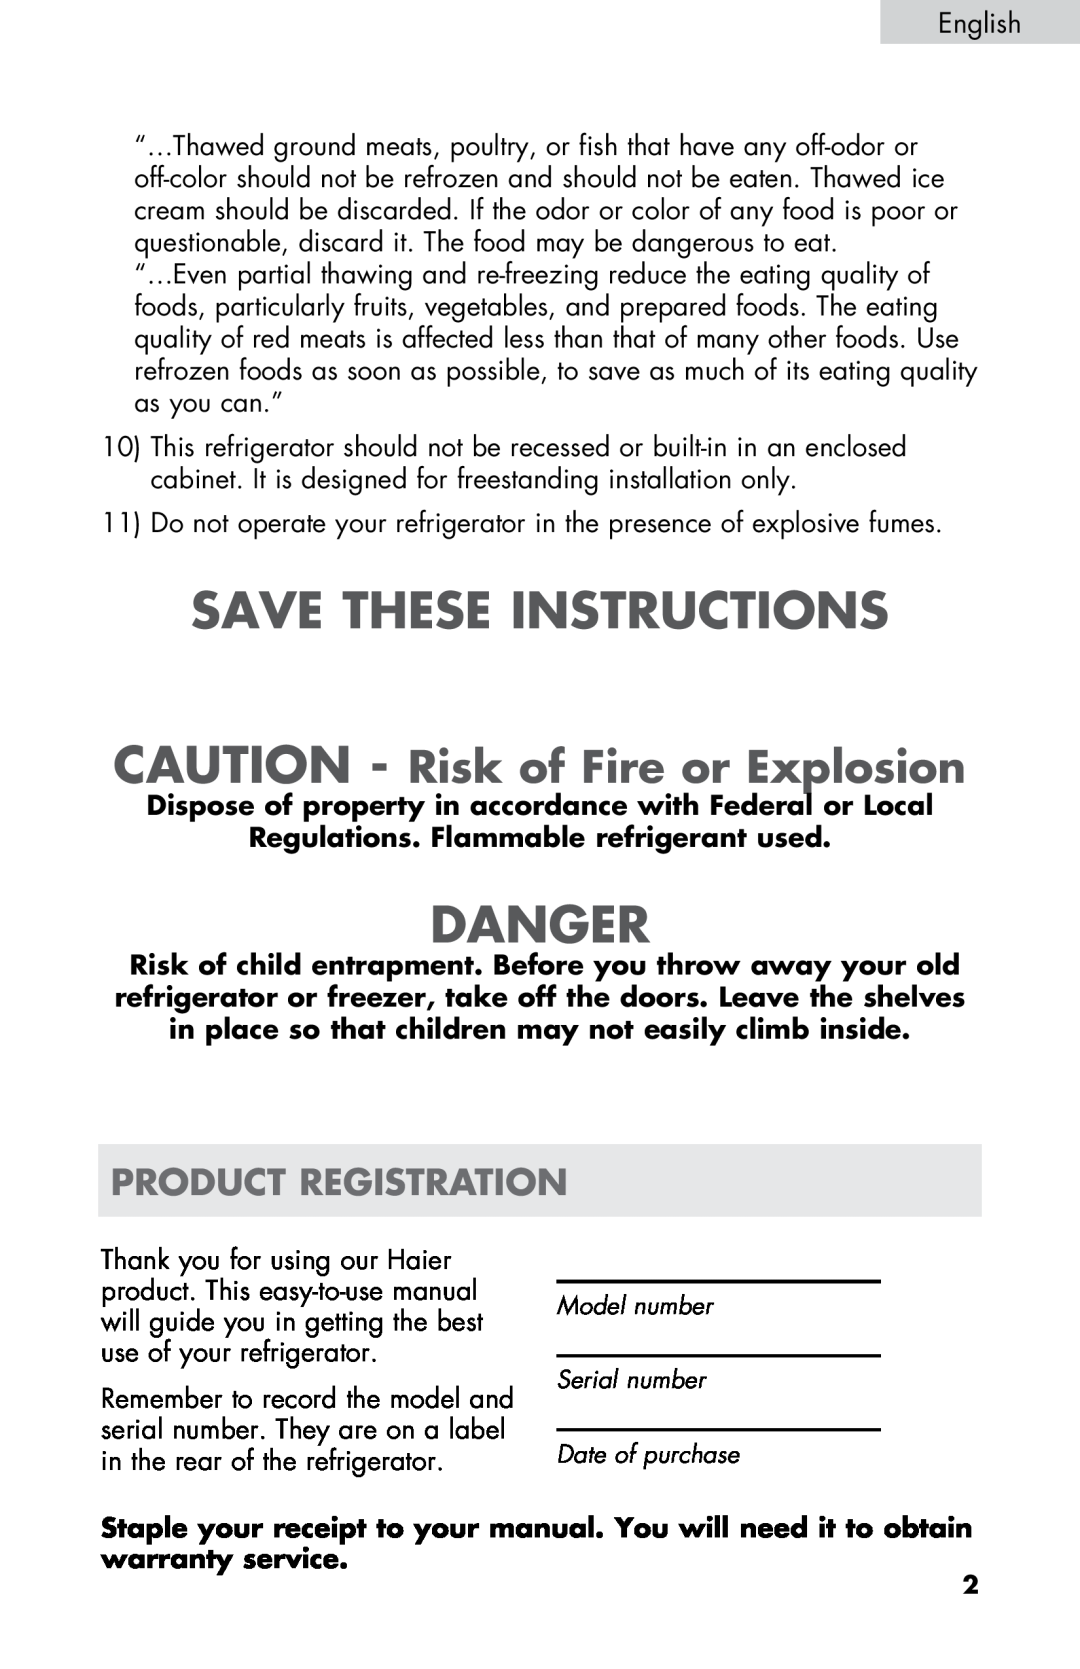 Haier HC17SF15RW user manual Save These Instructions, Danger, CAUTION - Risk of Fire or Explosion, product registration 